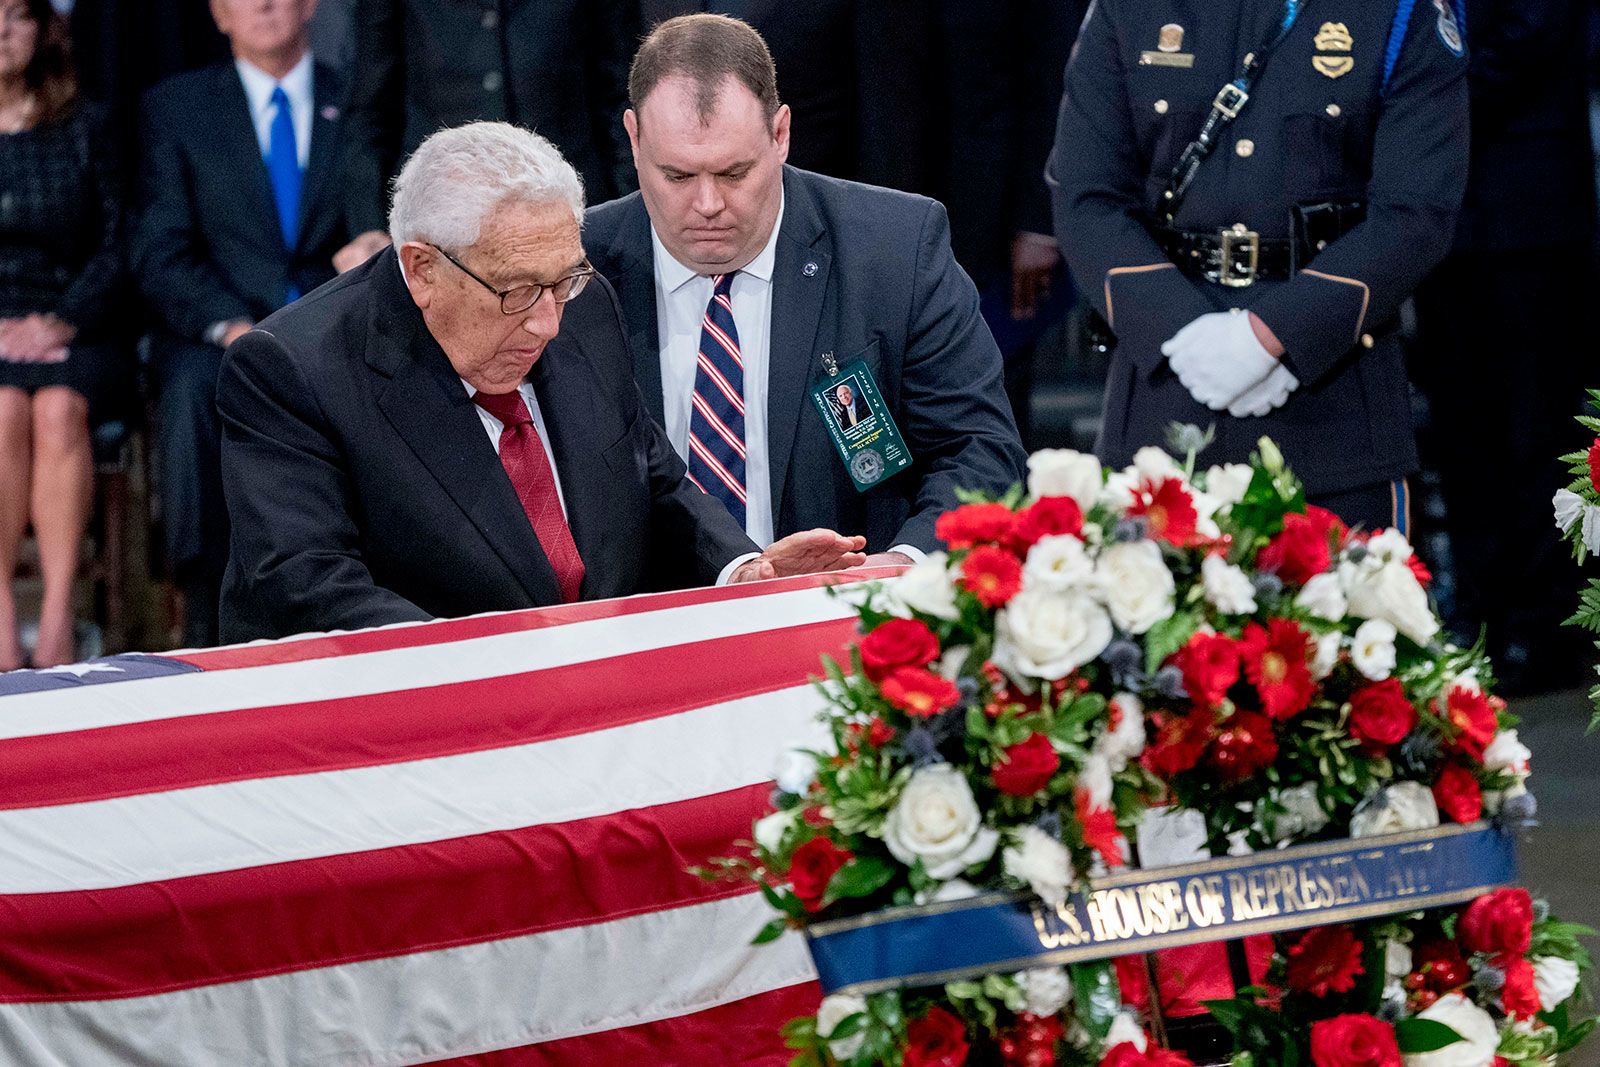 Kissinger touches McCain's casket as he lies in state at the US Capitol in 2018.